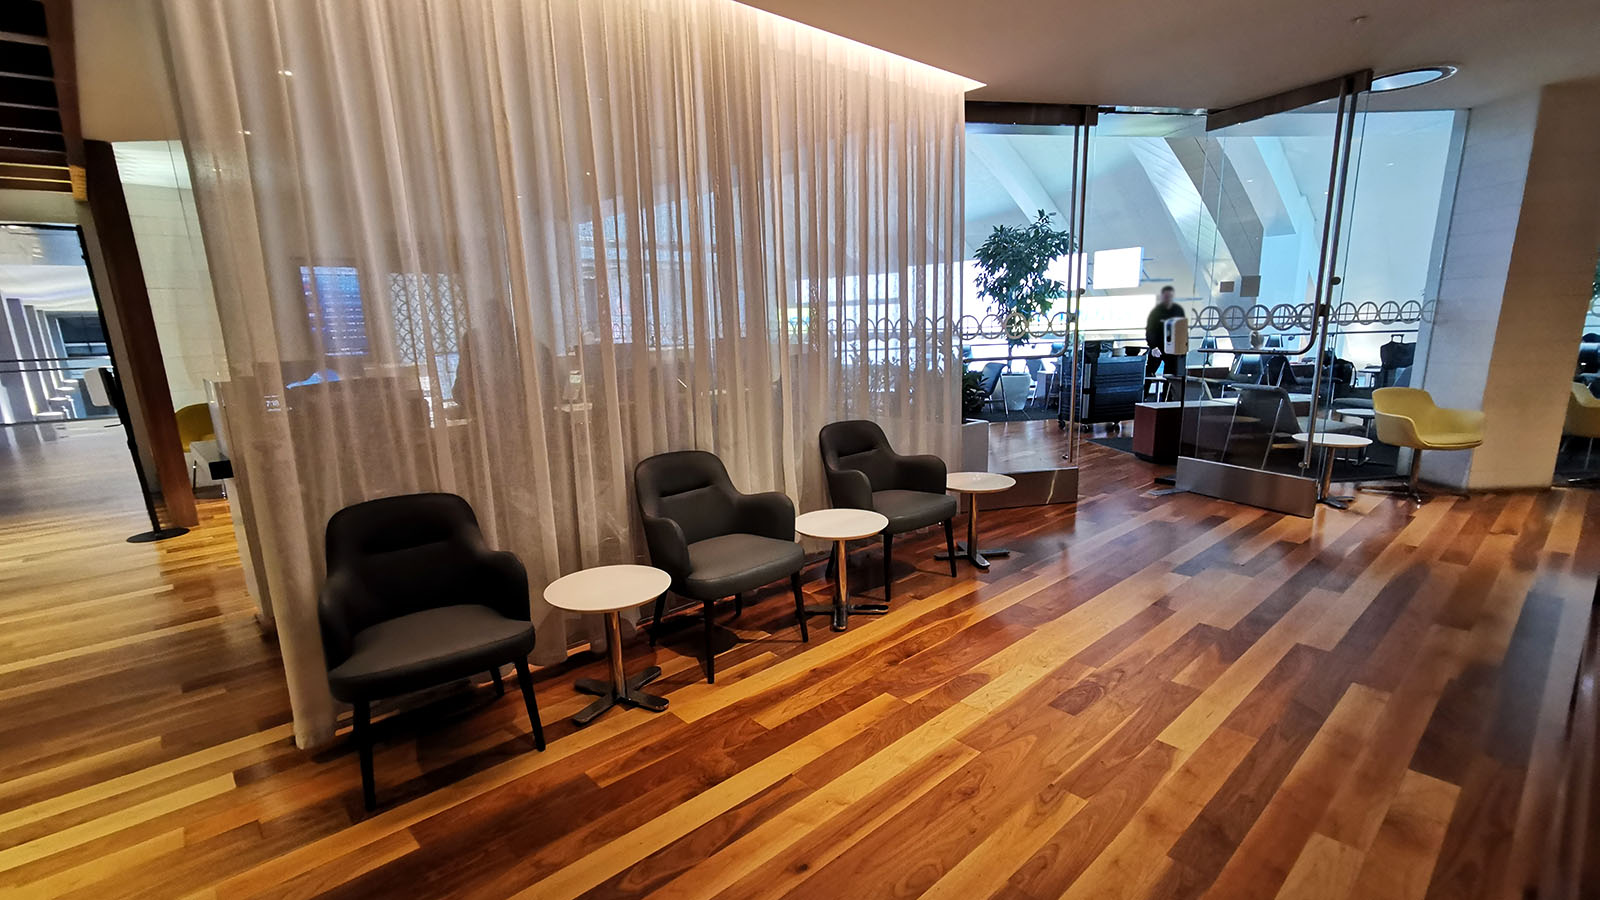 Near the front of the Business Class Star Alliance Lounge, Los Angeles